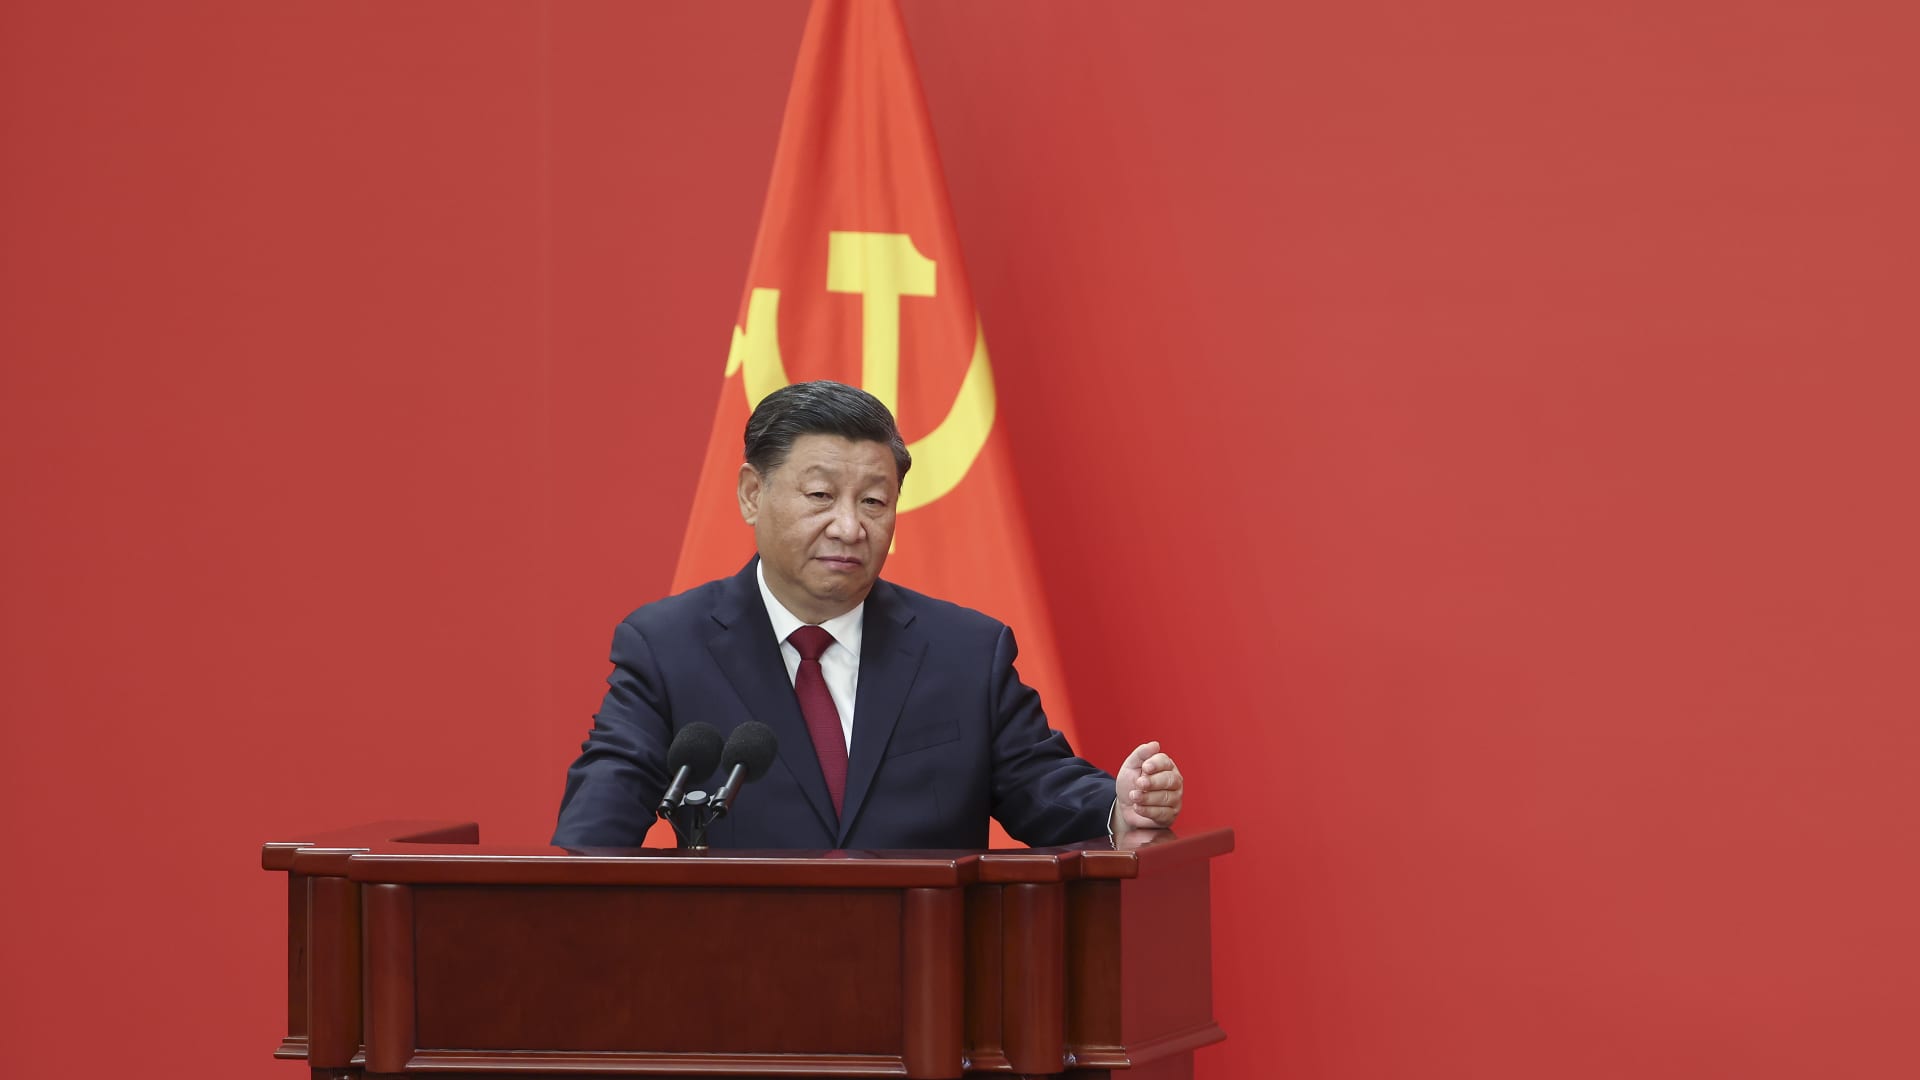 Xi's economic policies are leaving many China watchers perplexed and confused